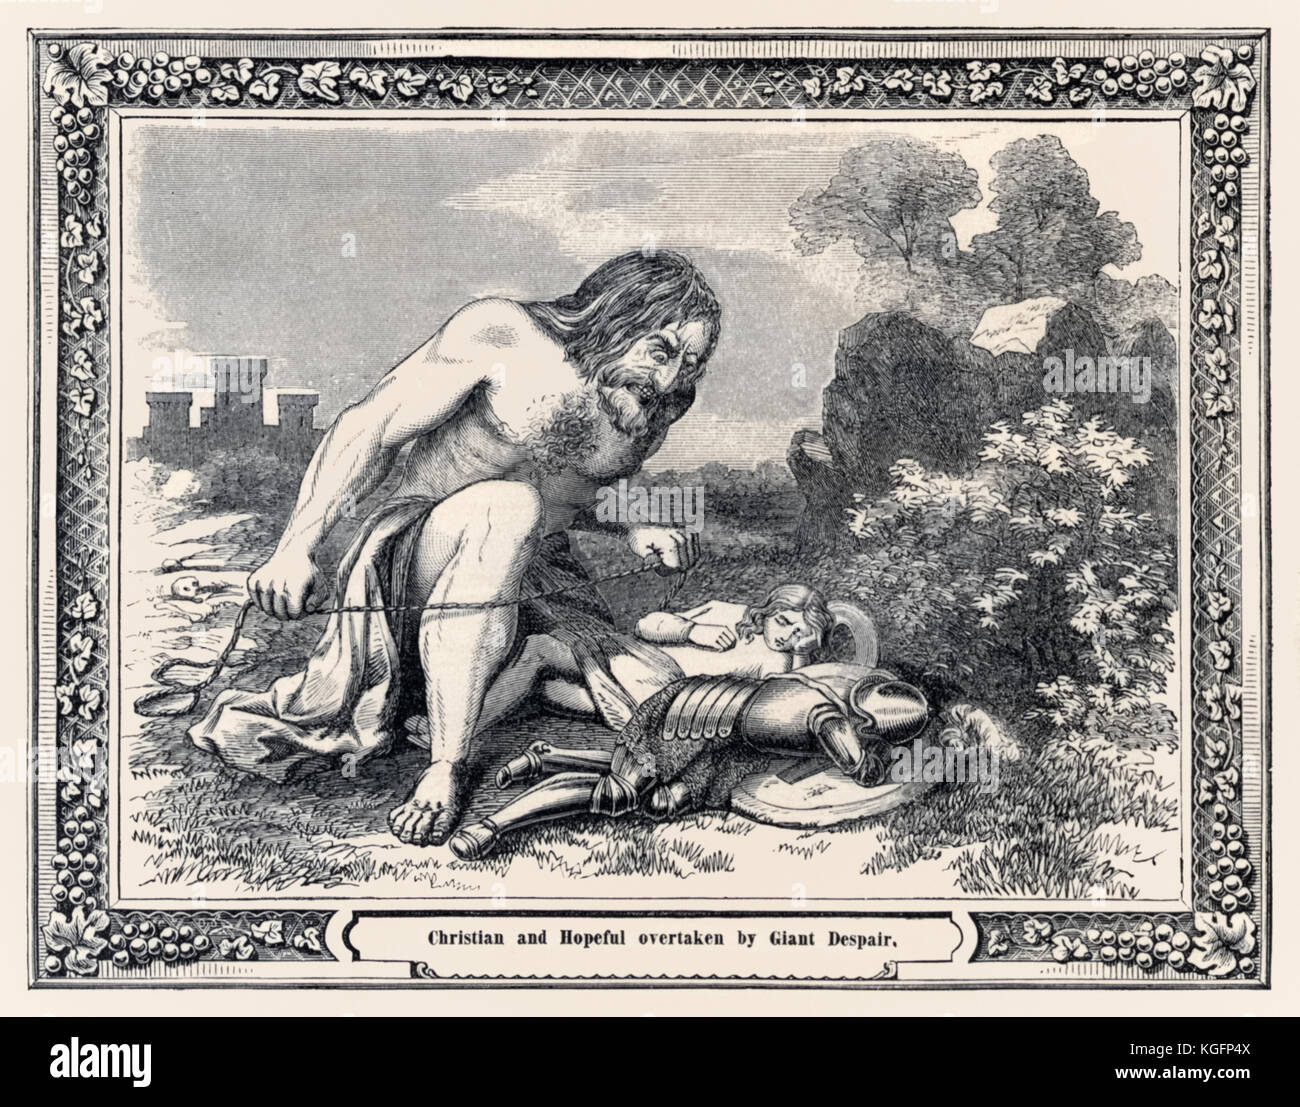 ‘Christian and Hopeful overtaken by the Giant Despair’ from the ‘Pictorial Pilgrim's Progress’ published by H. H. Lloyd & Co. NYC in 1862 based on ‘The Pilgrim’s Progress From This World, To That Which Is To Come’ by John Bunyan (1628-1688) first published in 1678. Stock Photo